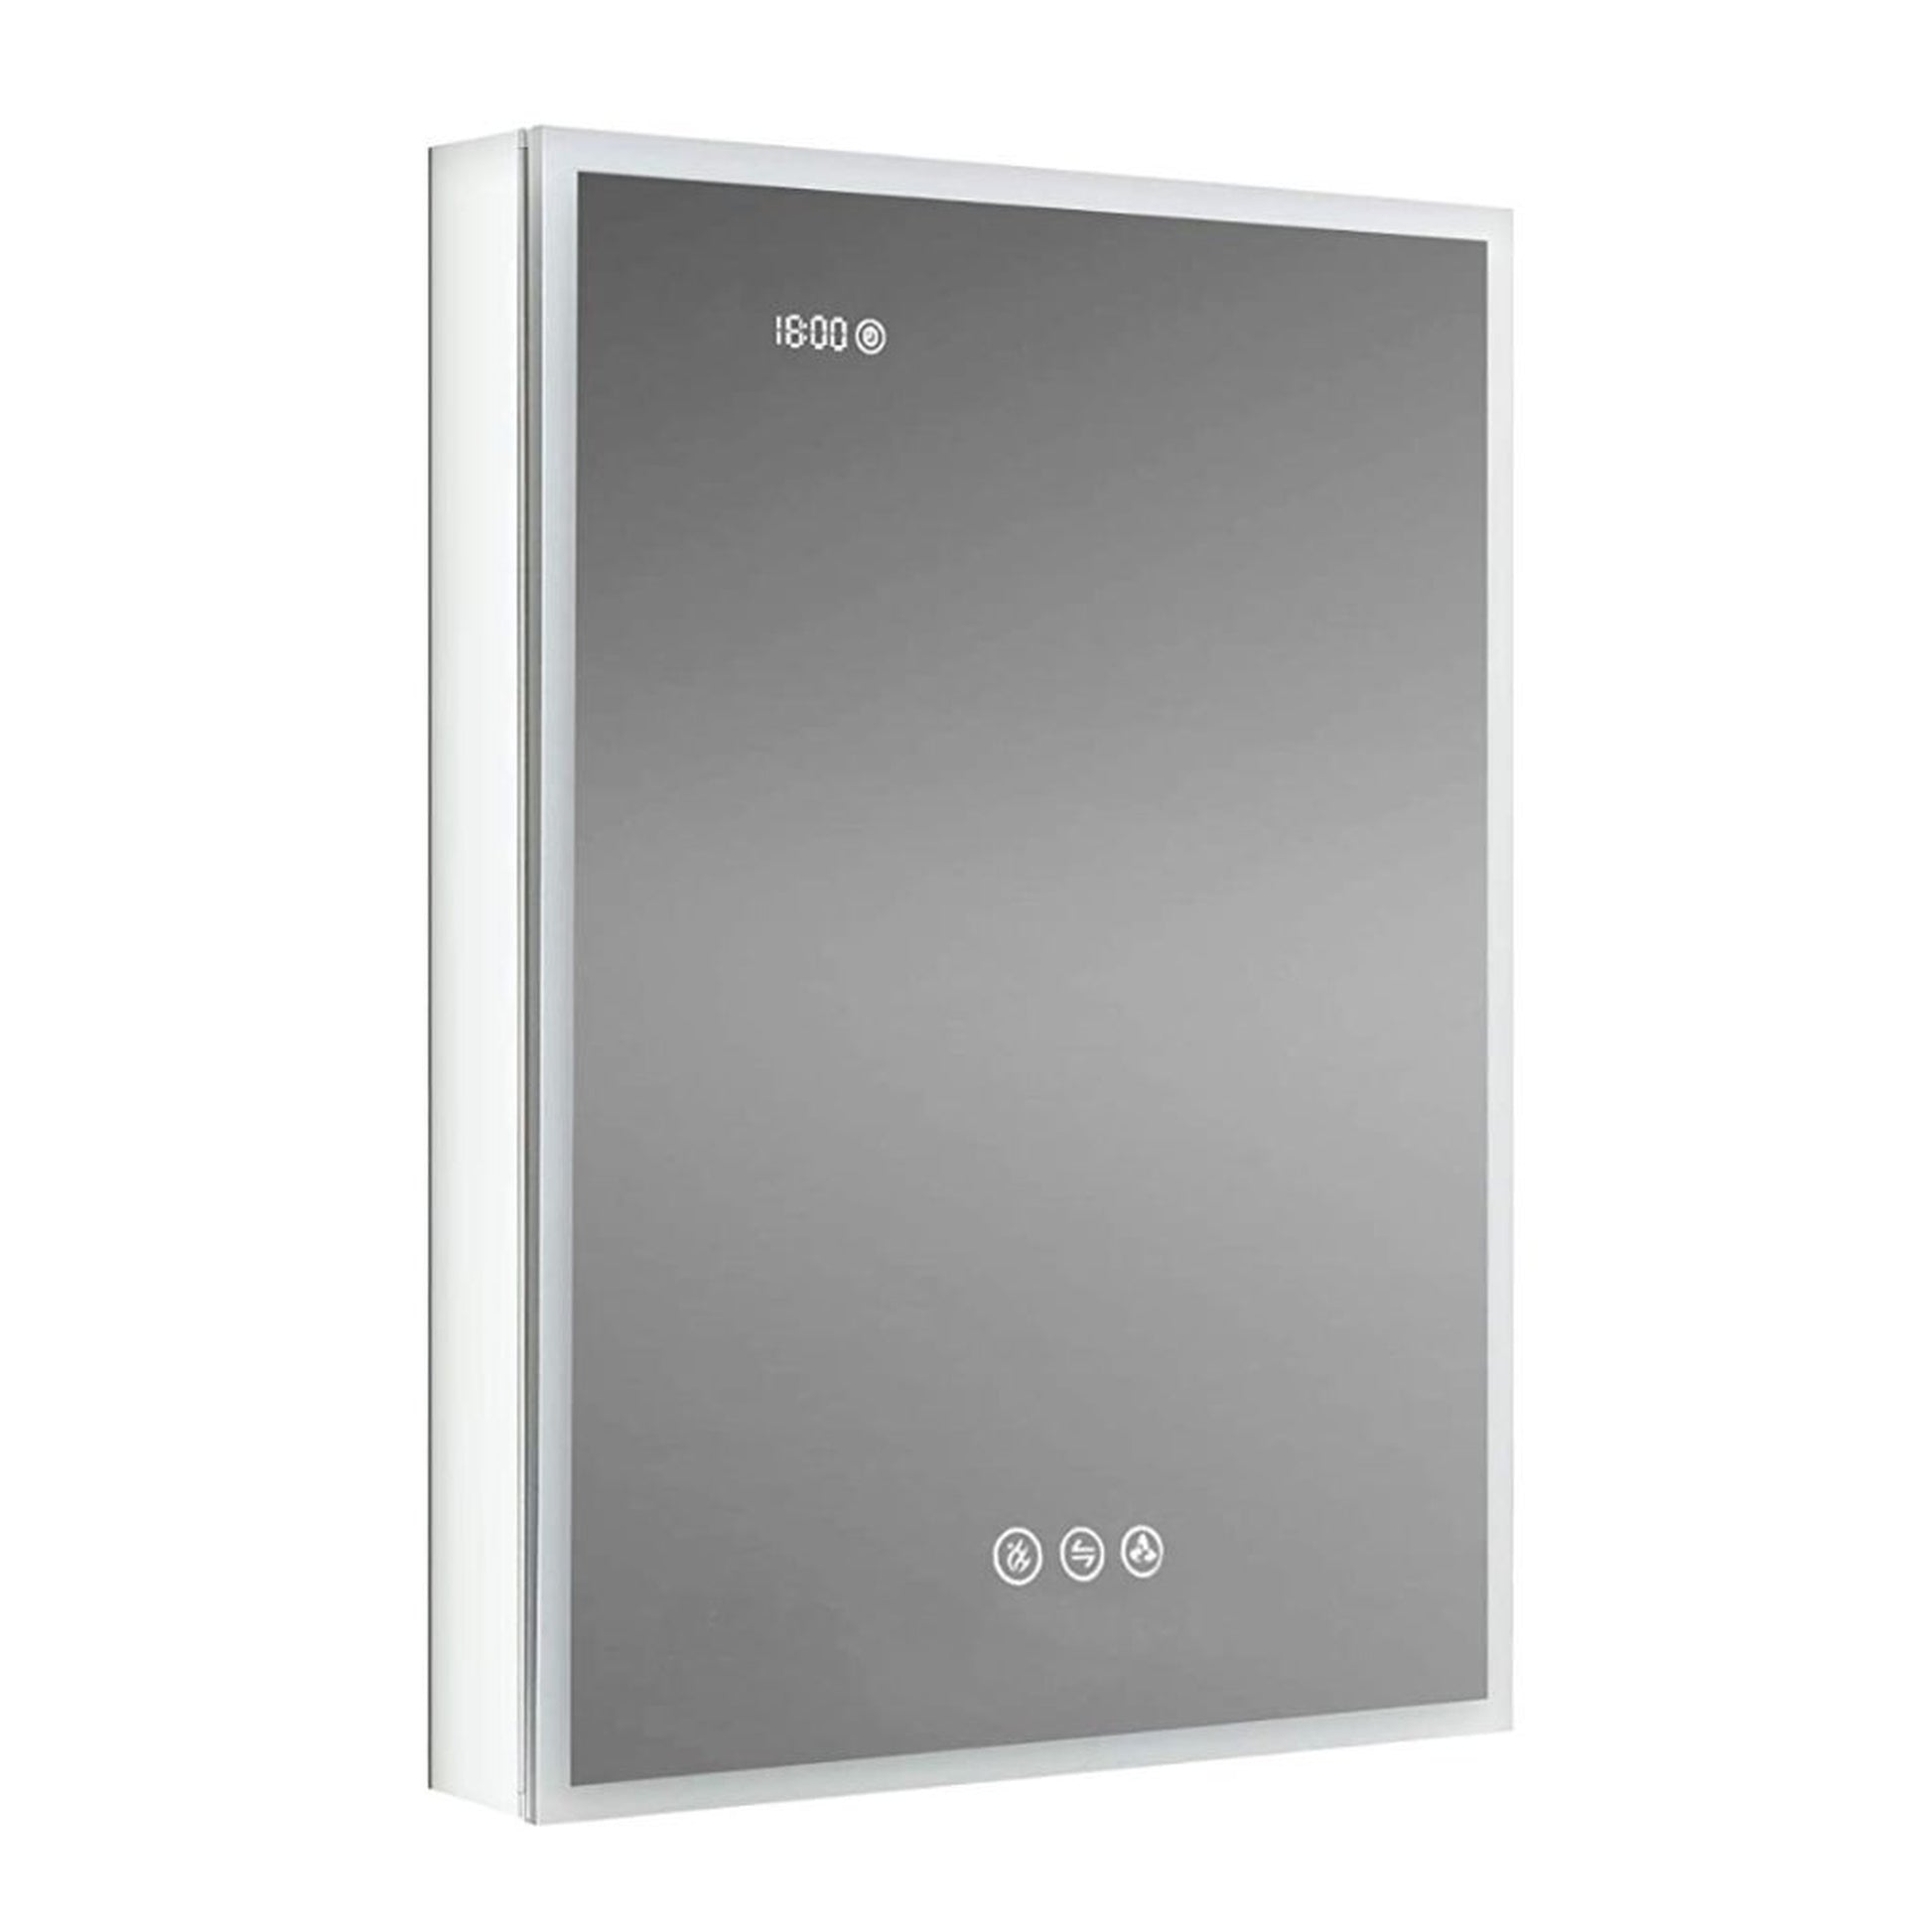 Blossom Sirius 20" x 32" Recessed or Surface Mount Left-Hinged Door LED Mirror Medicine Cabinet With 3 Adjustable Glass Shelves, Built-In Defogger, Dimmer, USB & Electrical Outlet